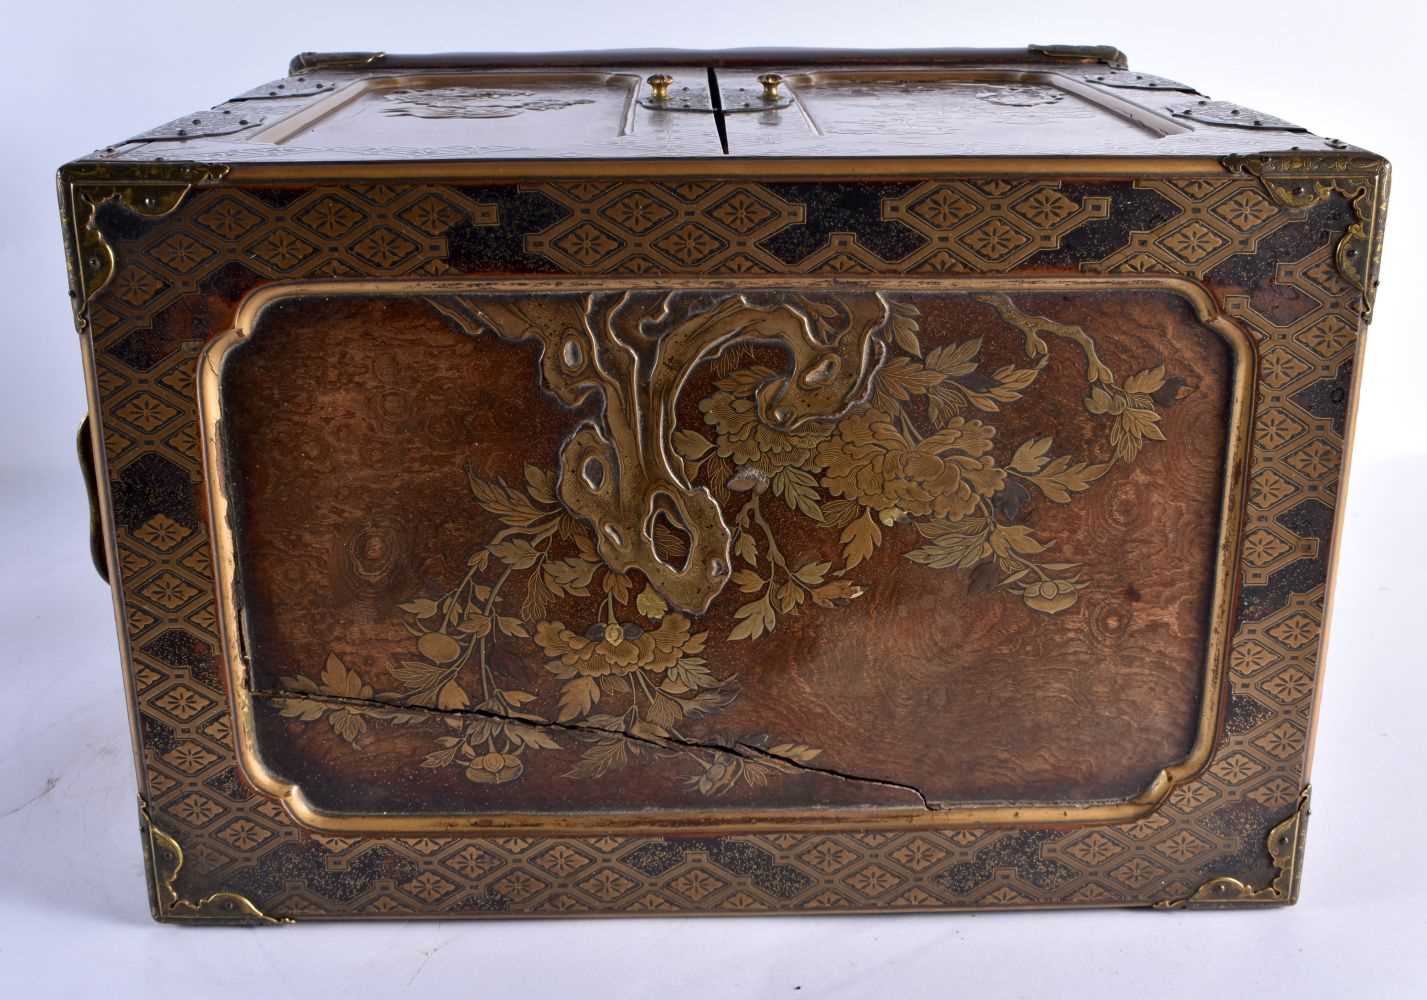 A VERY FINE 18TH/19TH CENTURY JAPANESE EDO PERIOD LACQUERED TABLE CABINET by Tsurushita Chouji, upon - Image 25 of 32